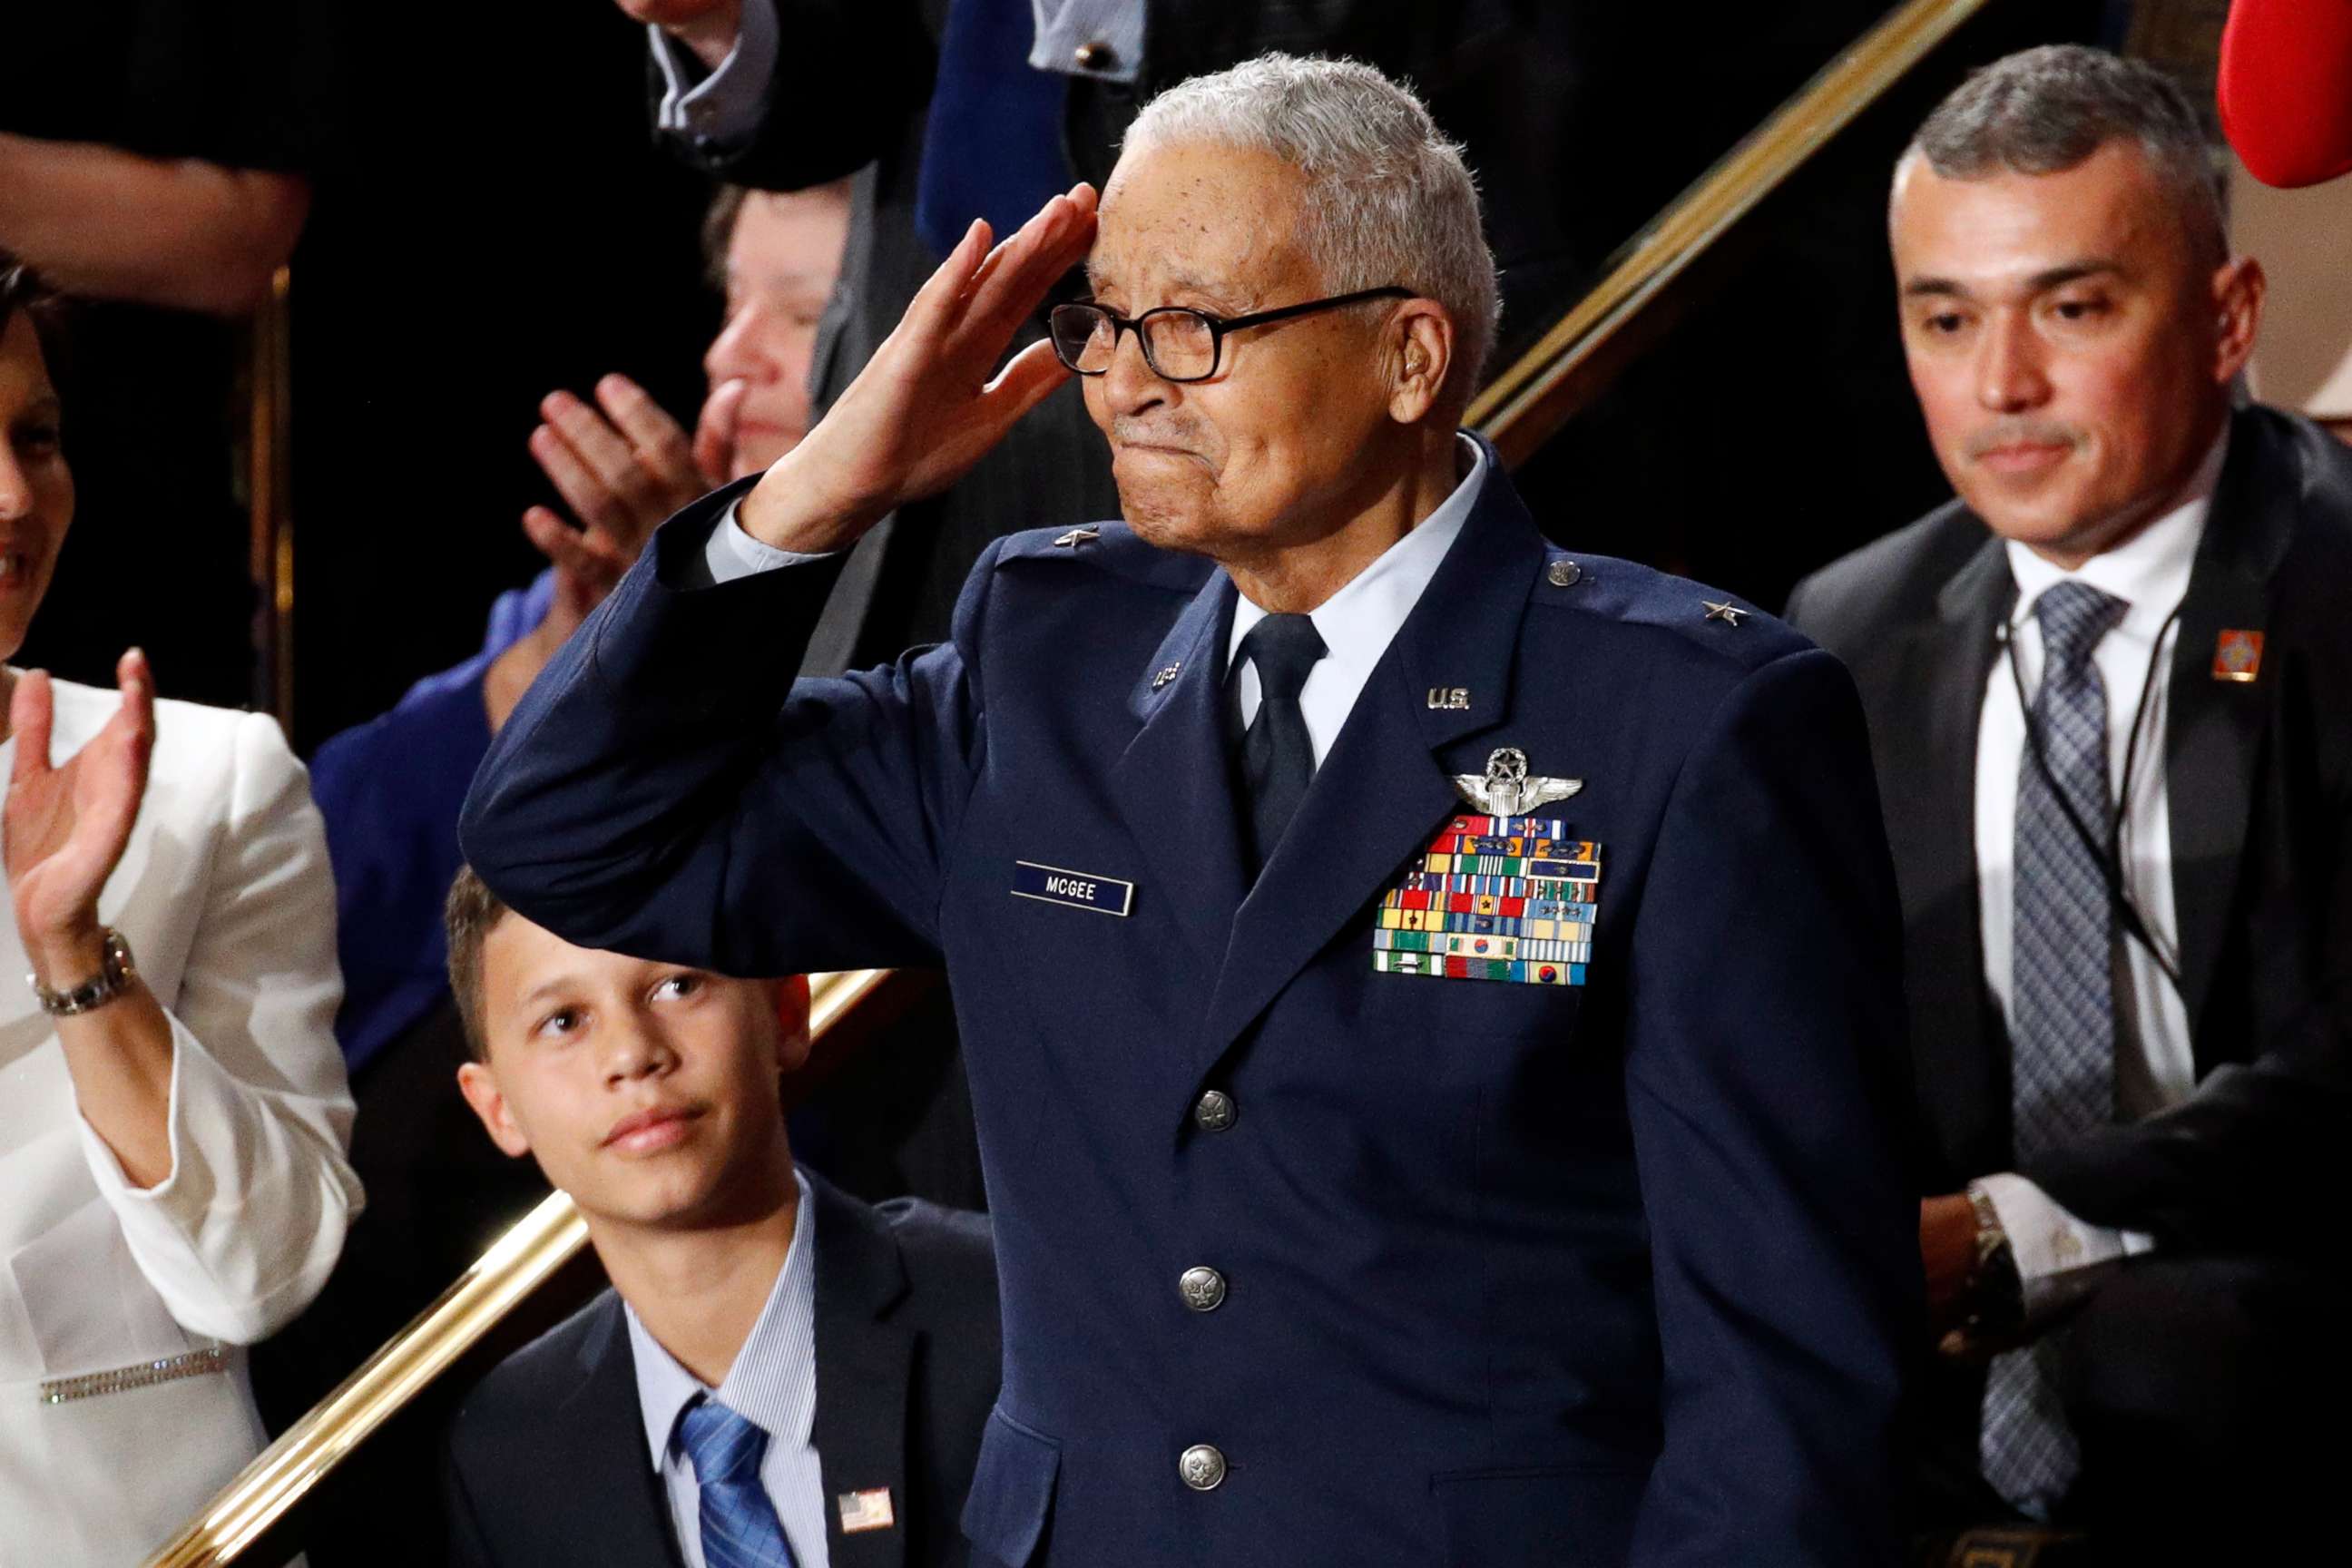 PHOTO: Tuskegee airman Charles McGee, 100, salutes as his great grandson Iain Lanphier looks as President Donald Trump delivers his State of the Union address to a joint session of Congress on Capitol Hill in Washington, Tuesday, Feb. 4, 2020.